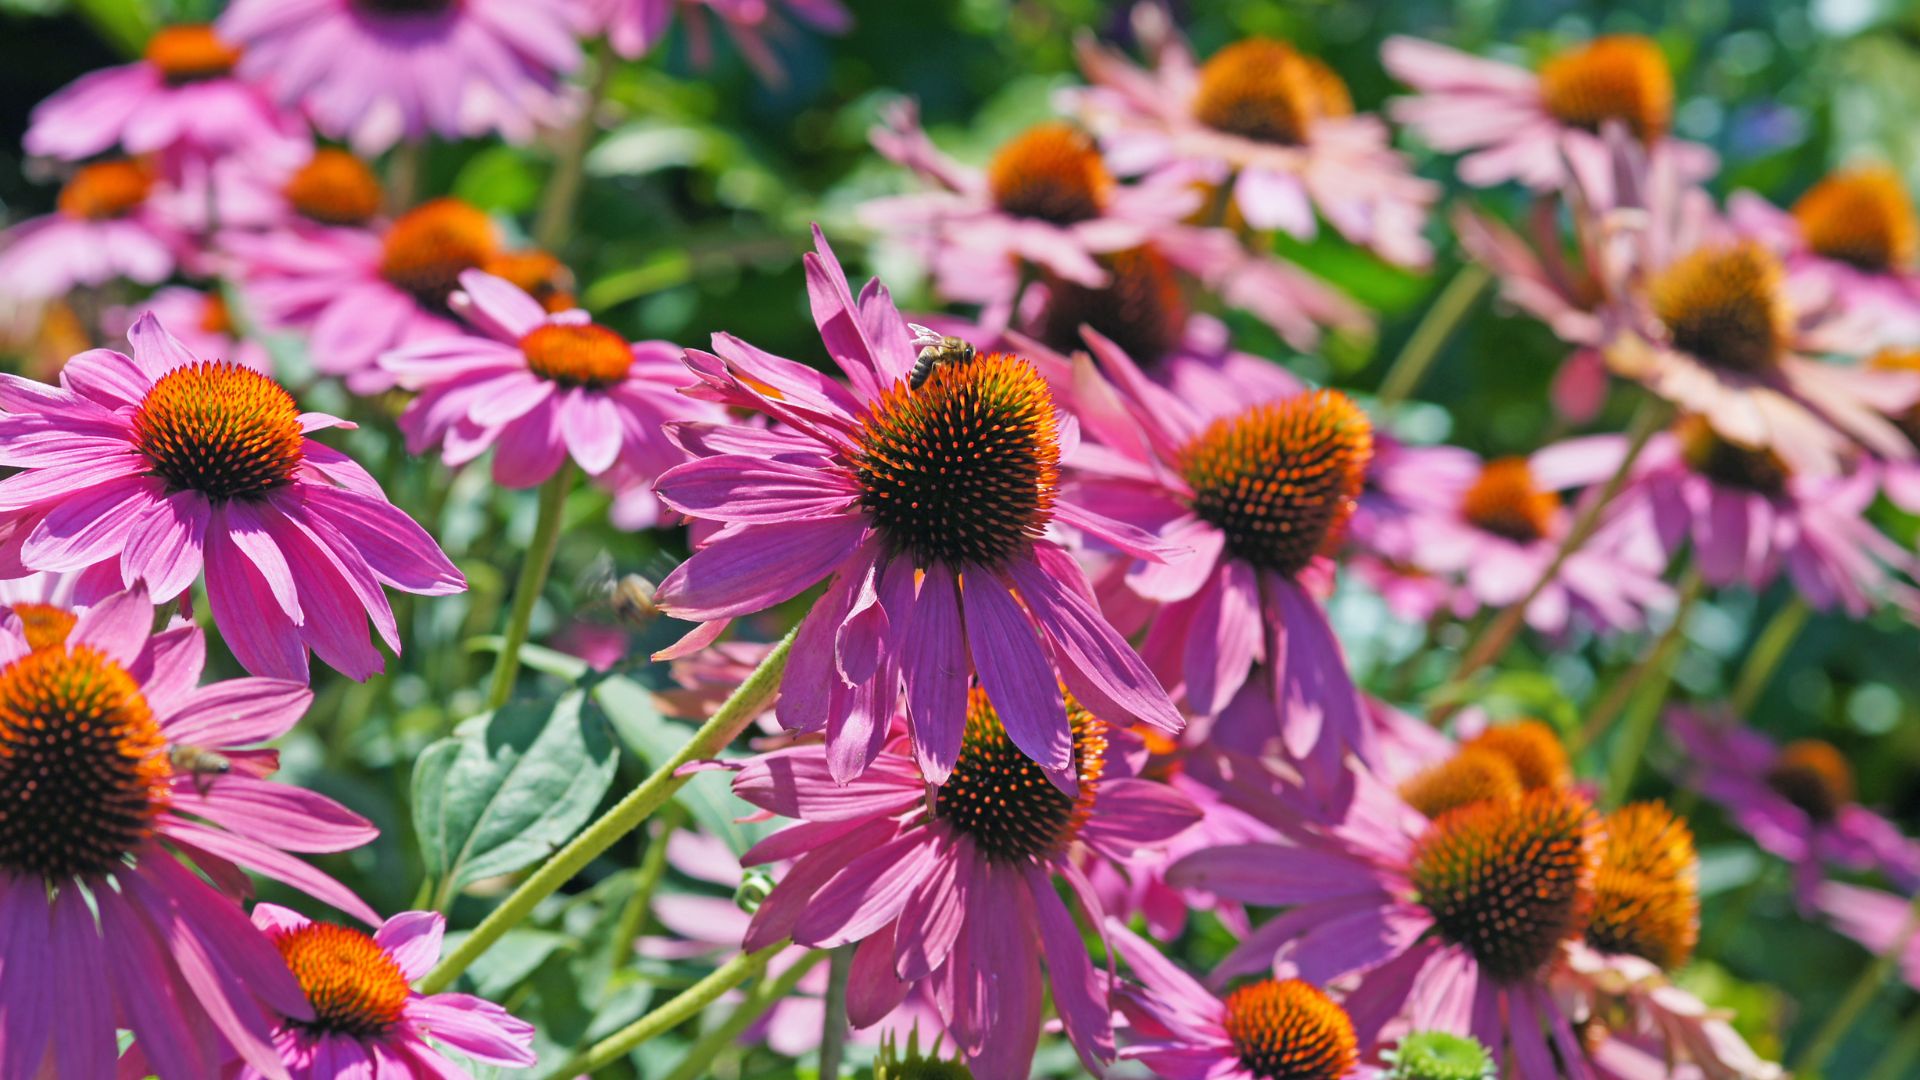 How To Harvest Coneflowers For A Wonderful Flower Display Next Year